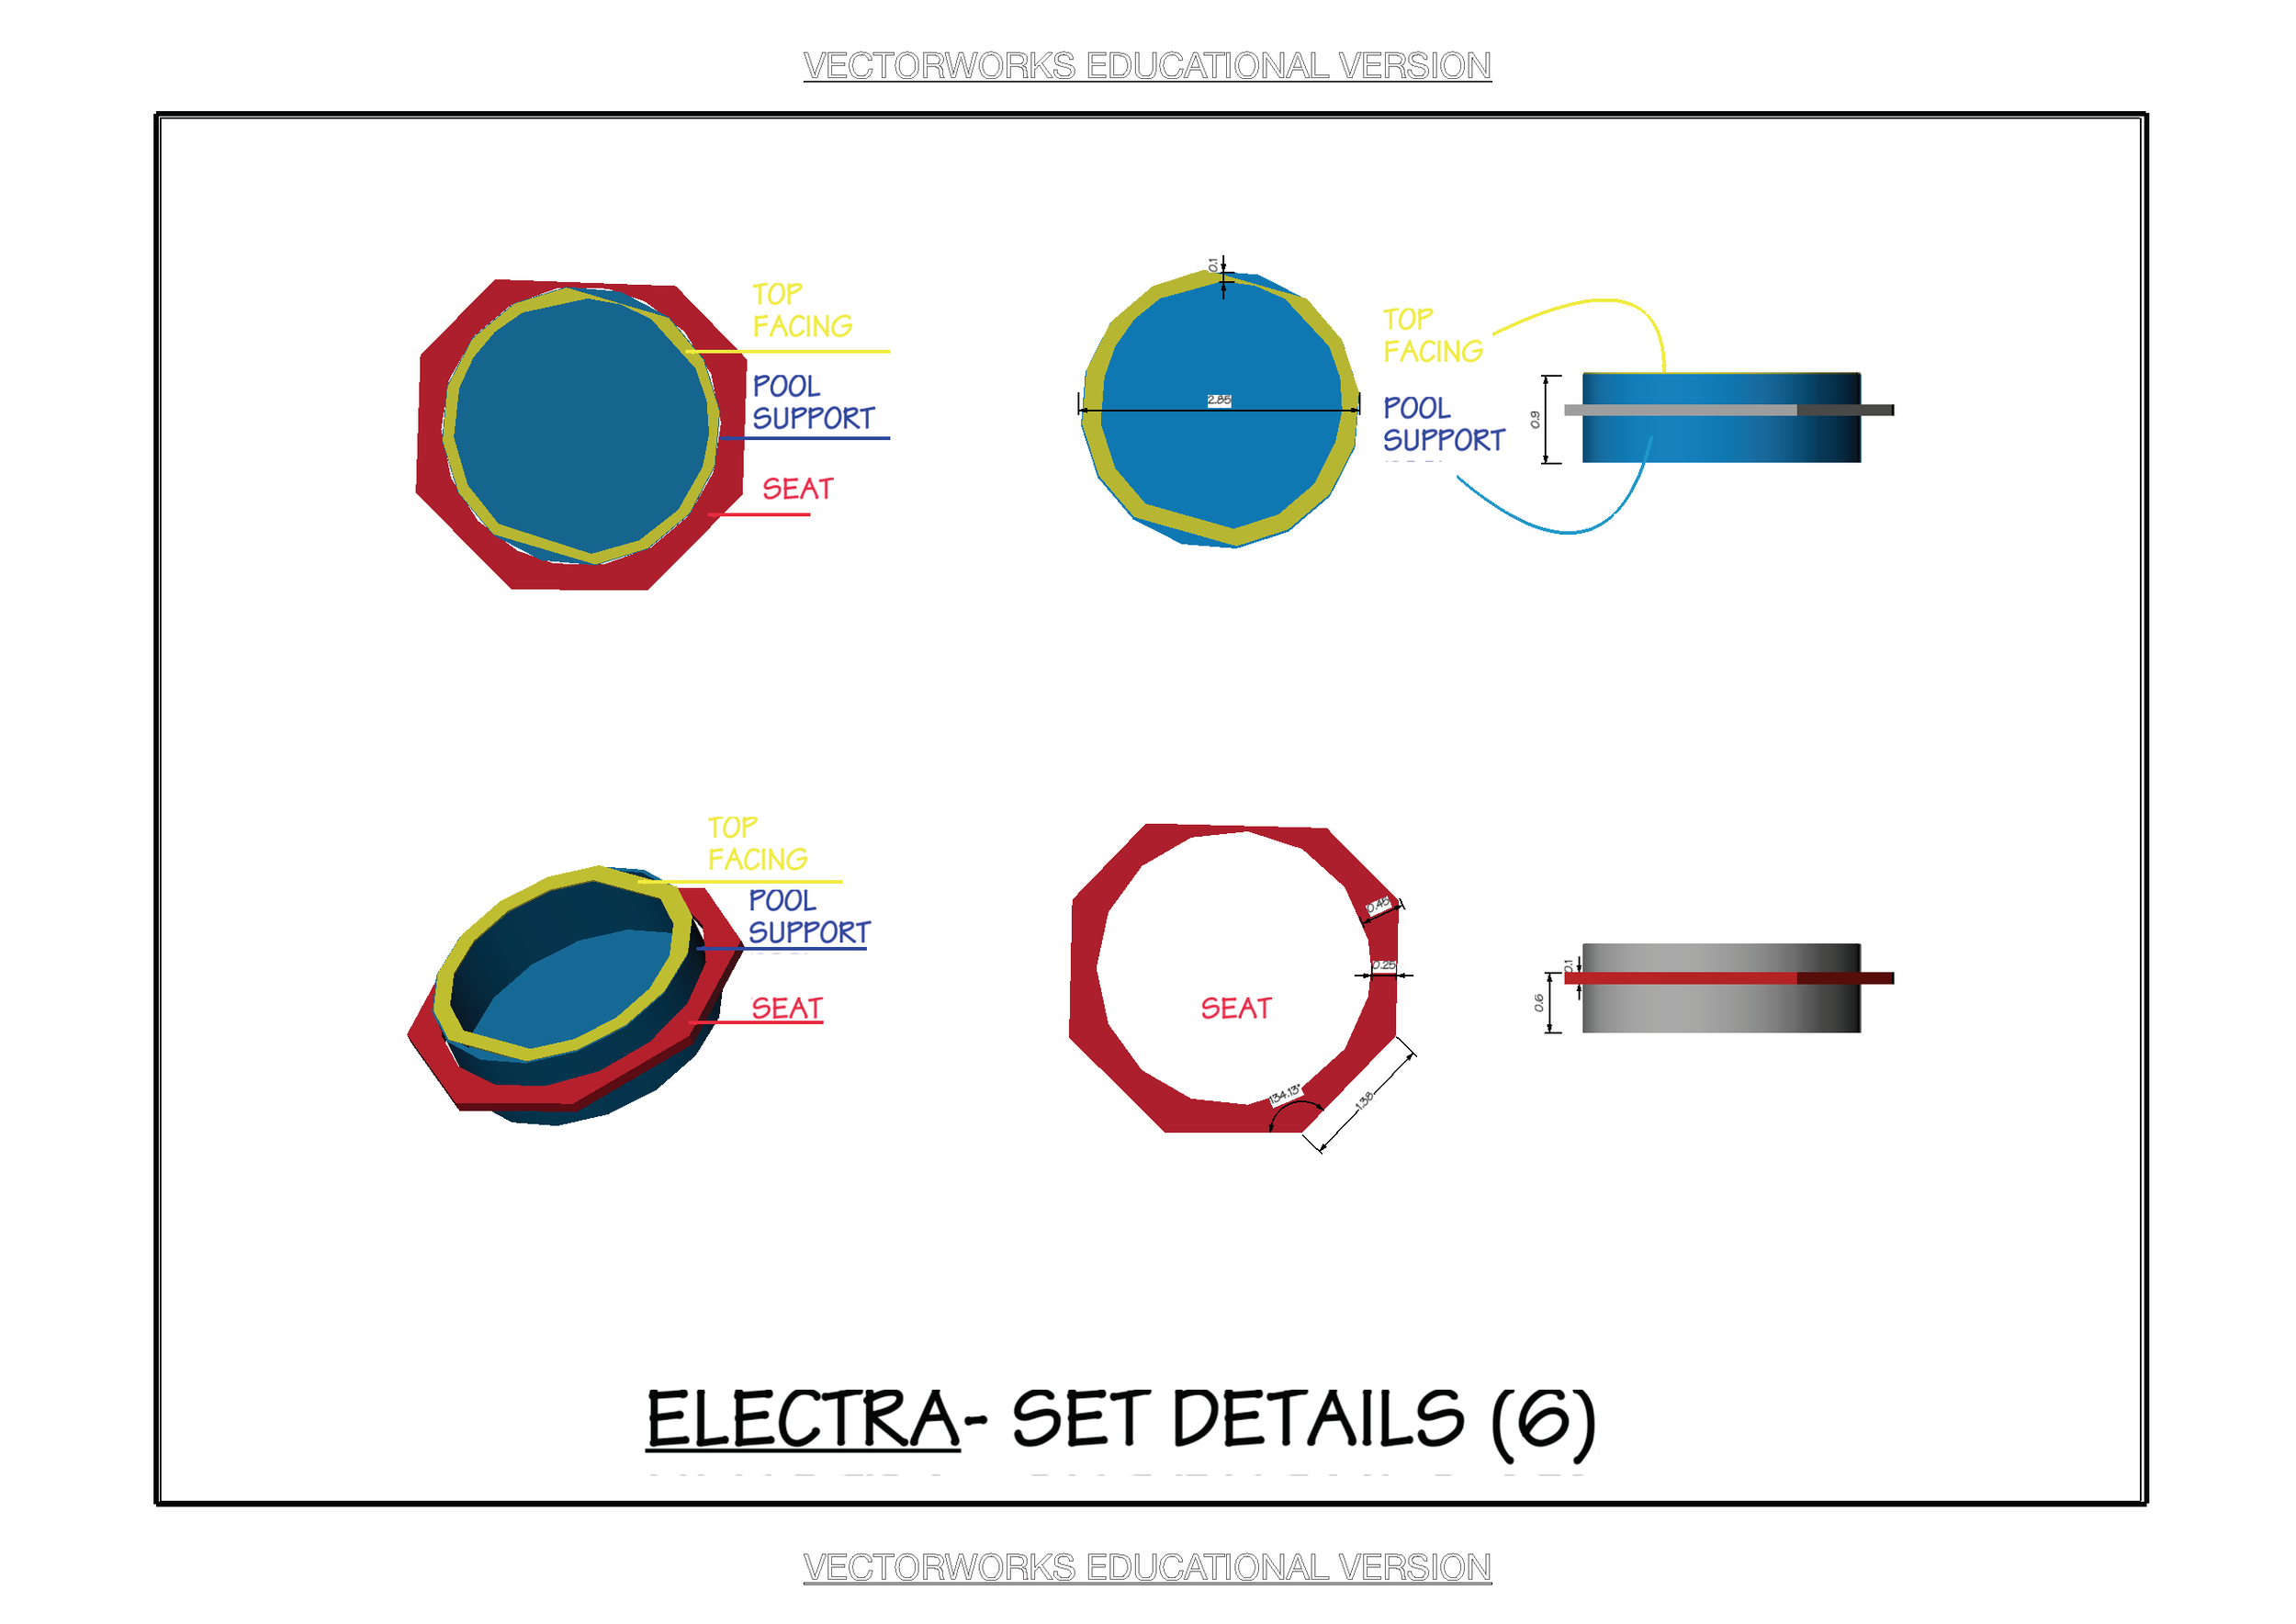 Electra- Pool structure details